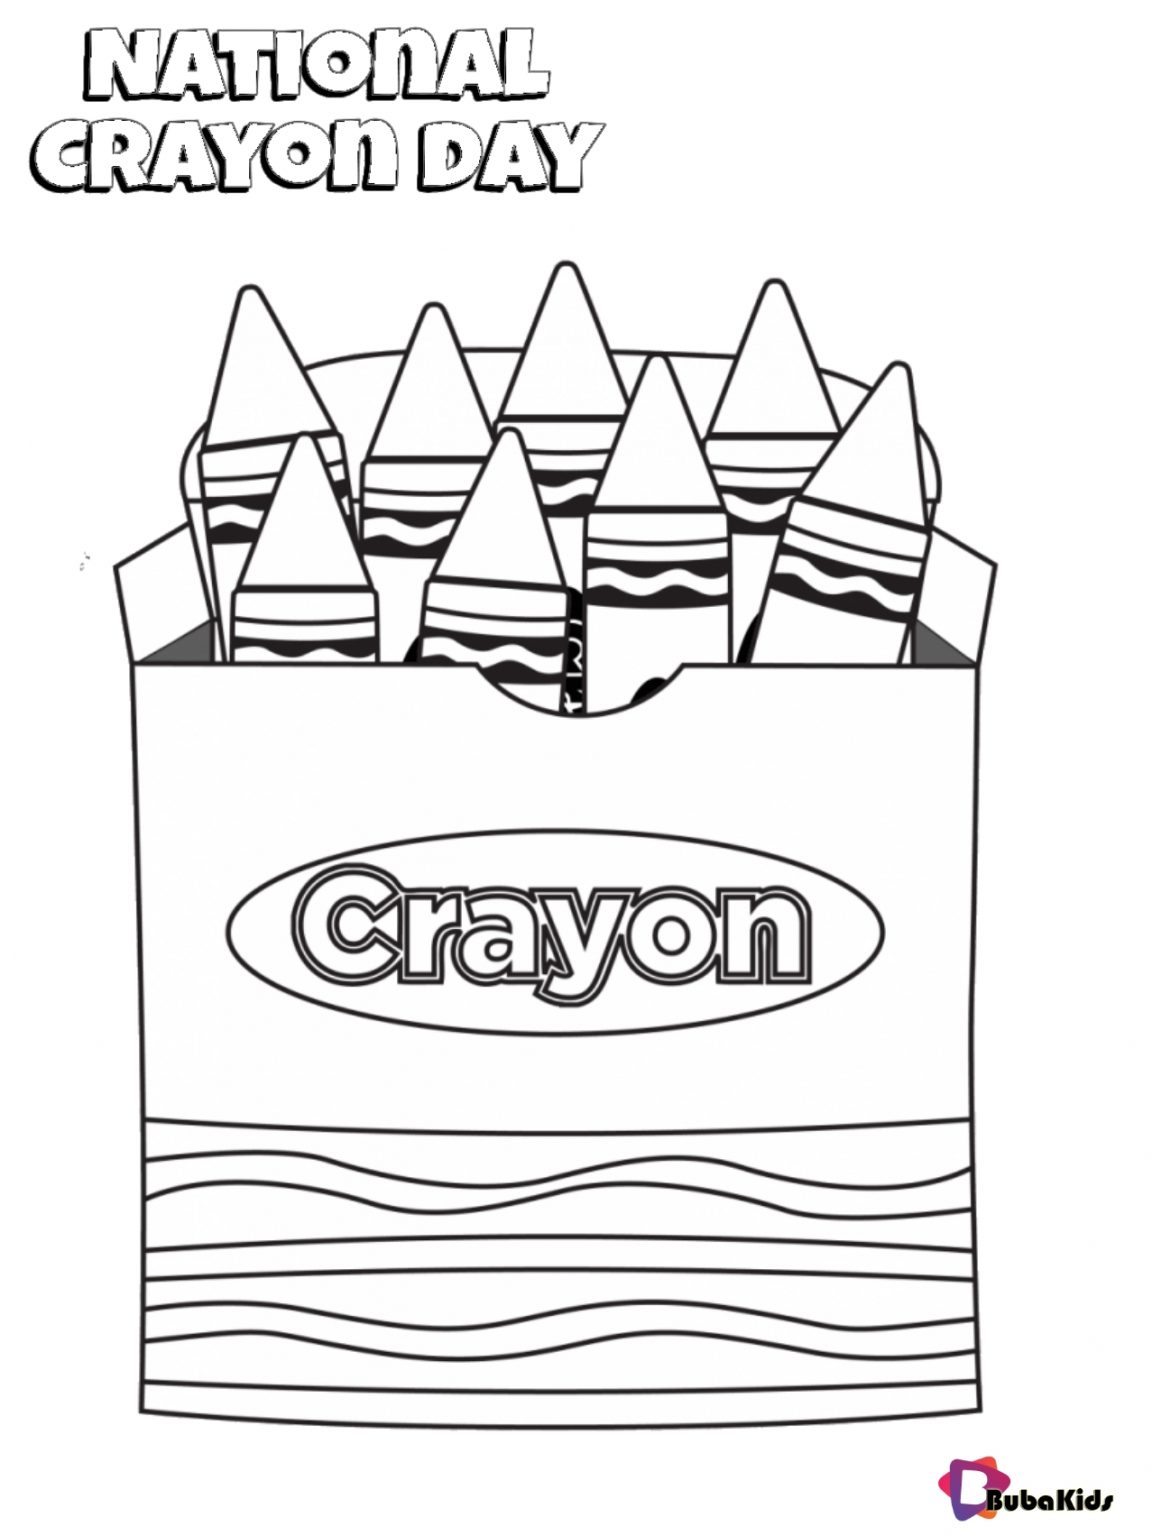 The Day The Crayons Quit Page Coloring Pages